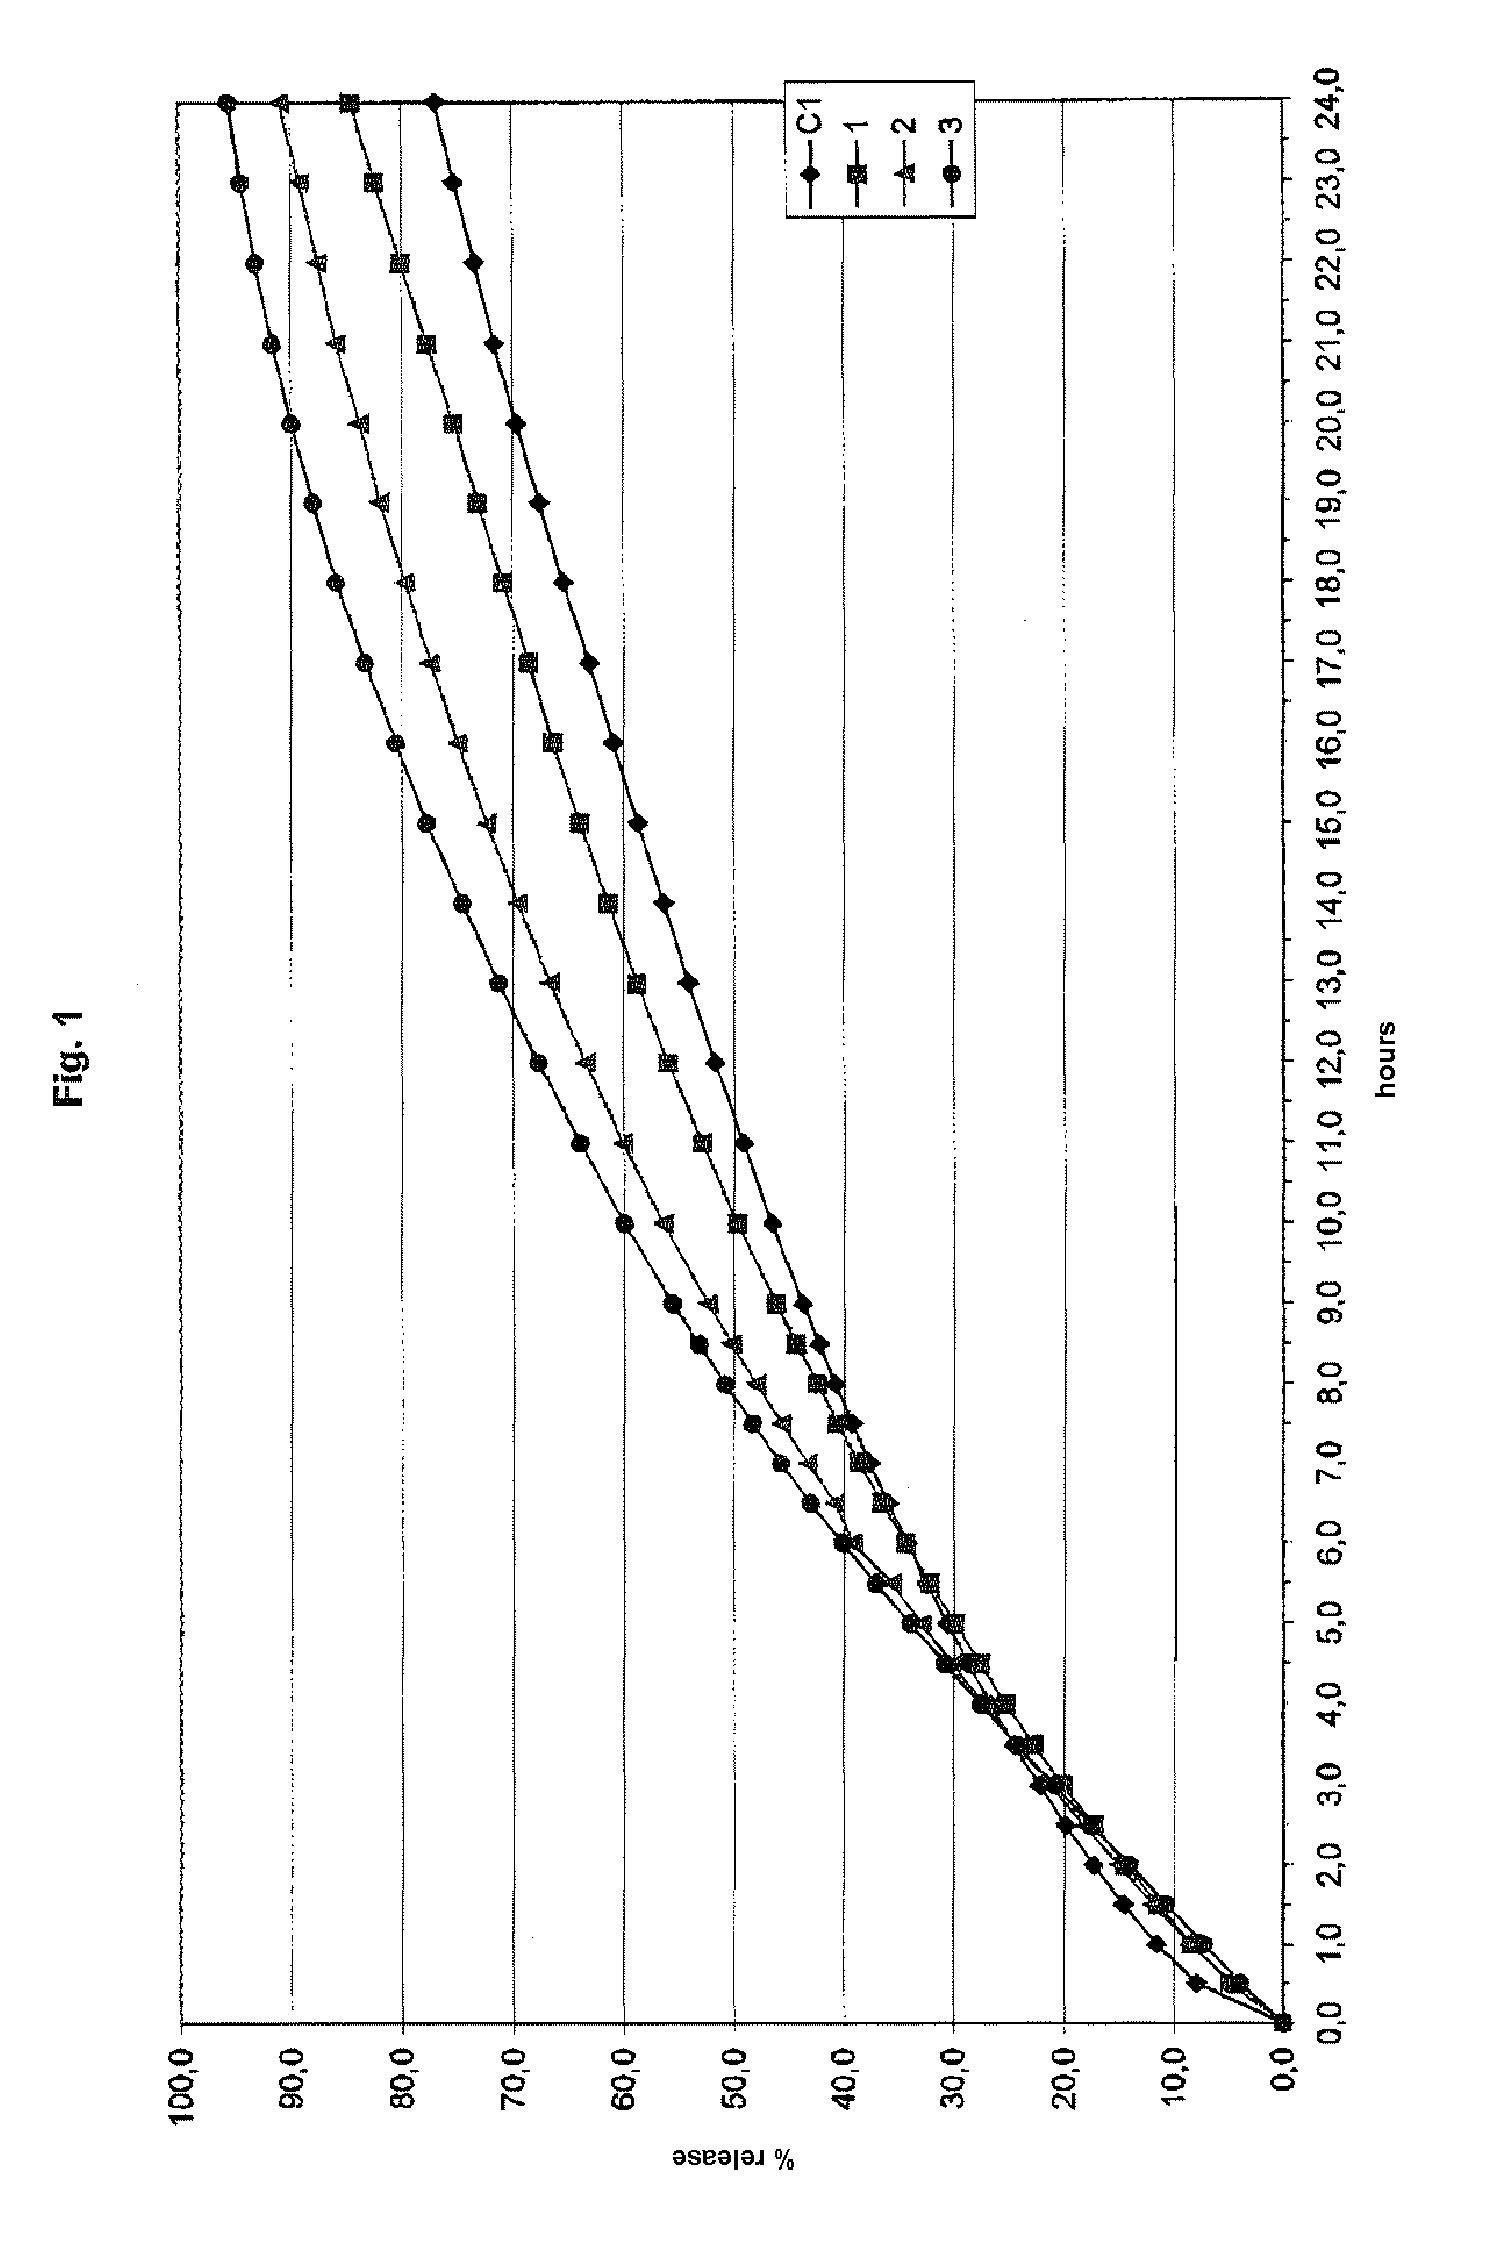 Controlled release pharmaceutical or food formulation and process for its preparation